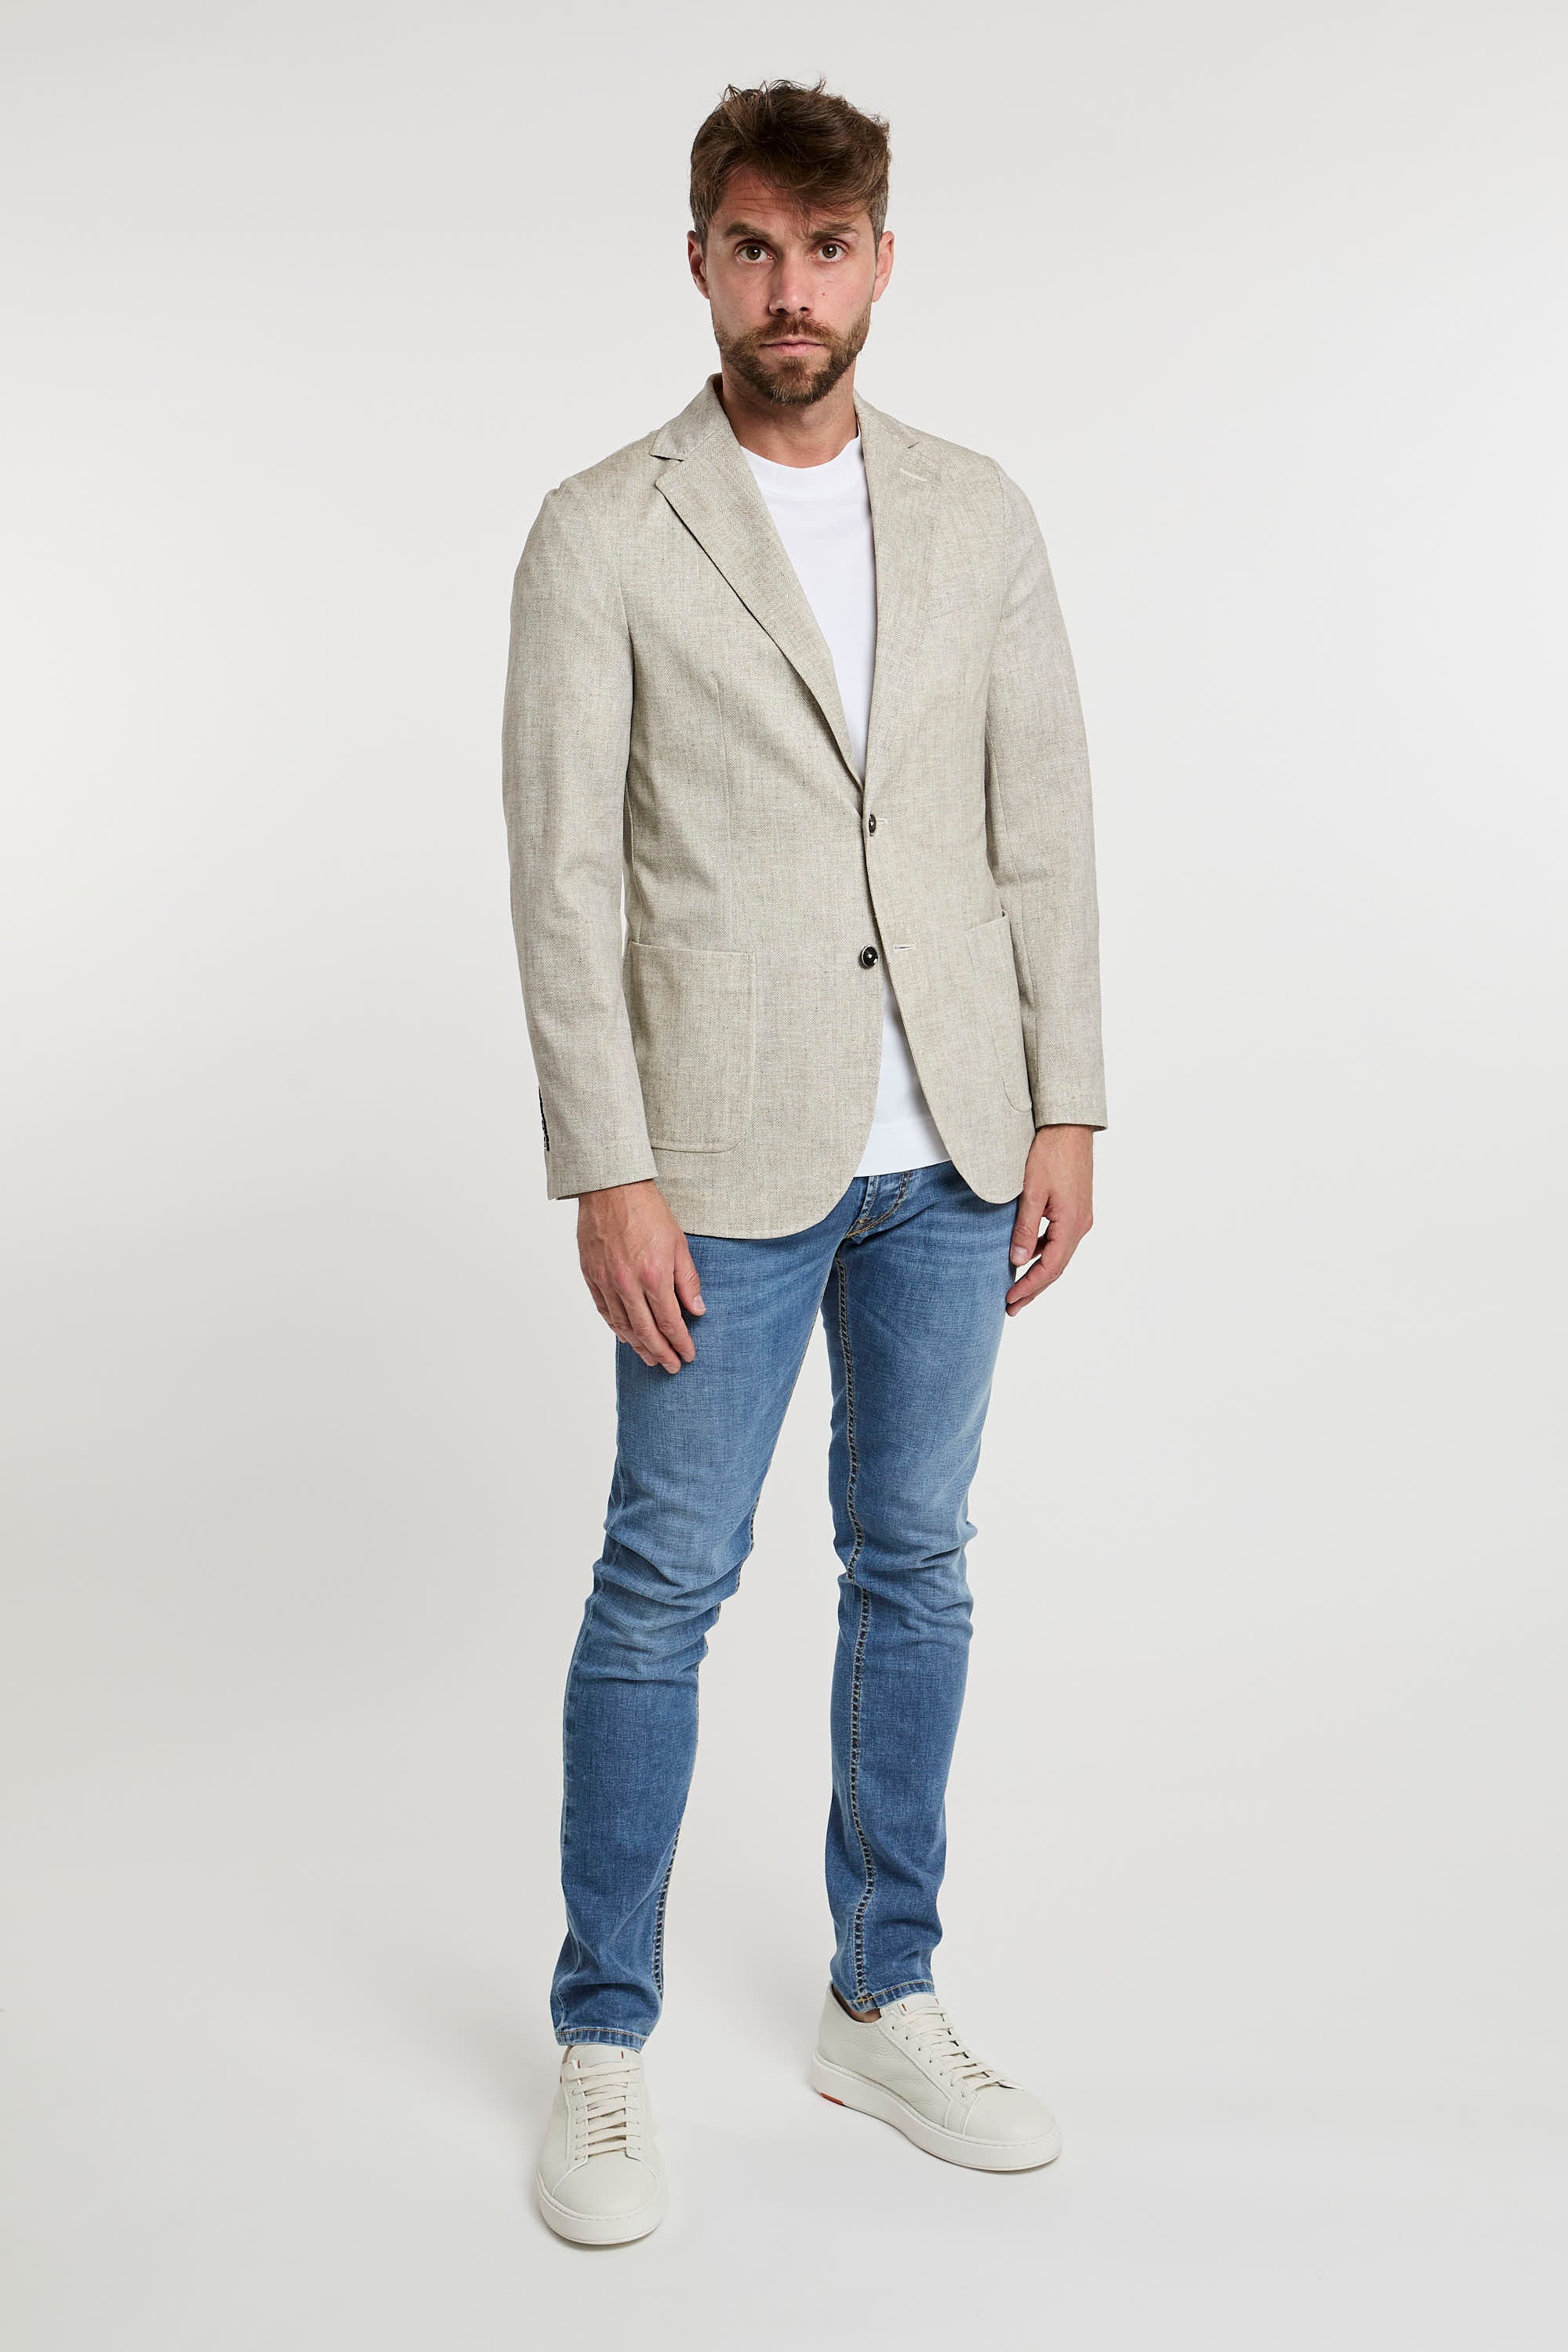 Circolo 1901 Cotton Jacket in Natural Beige-3